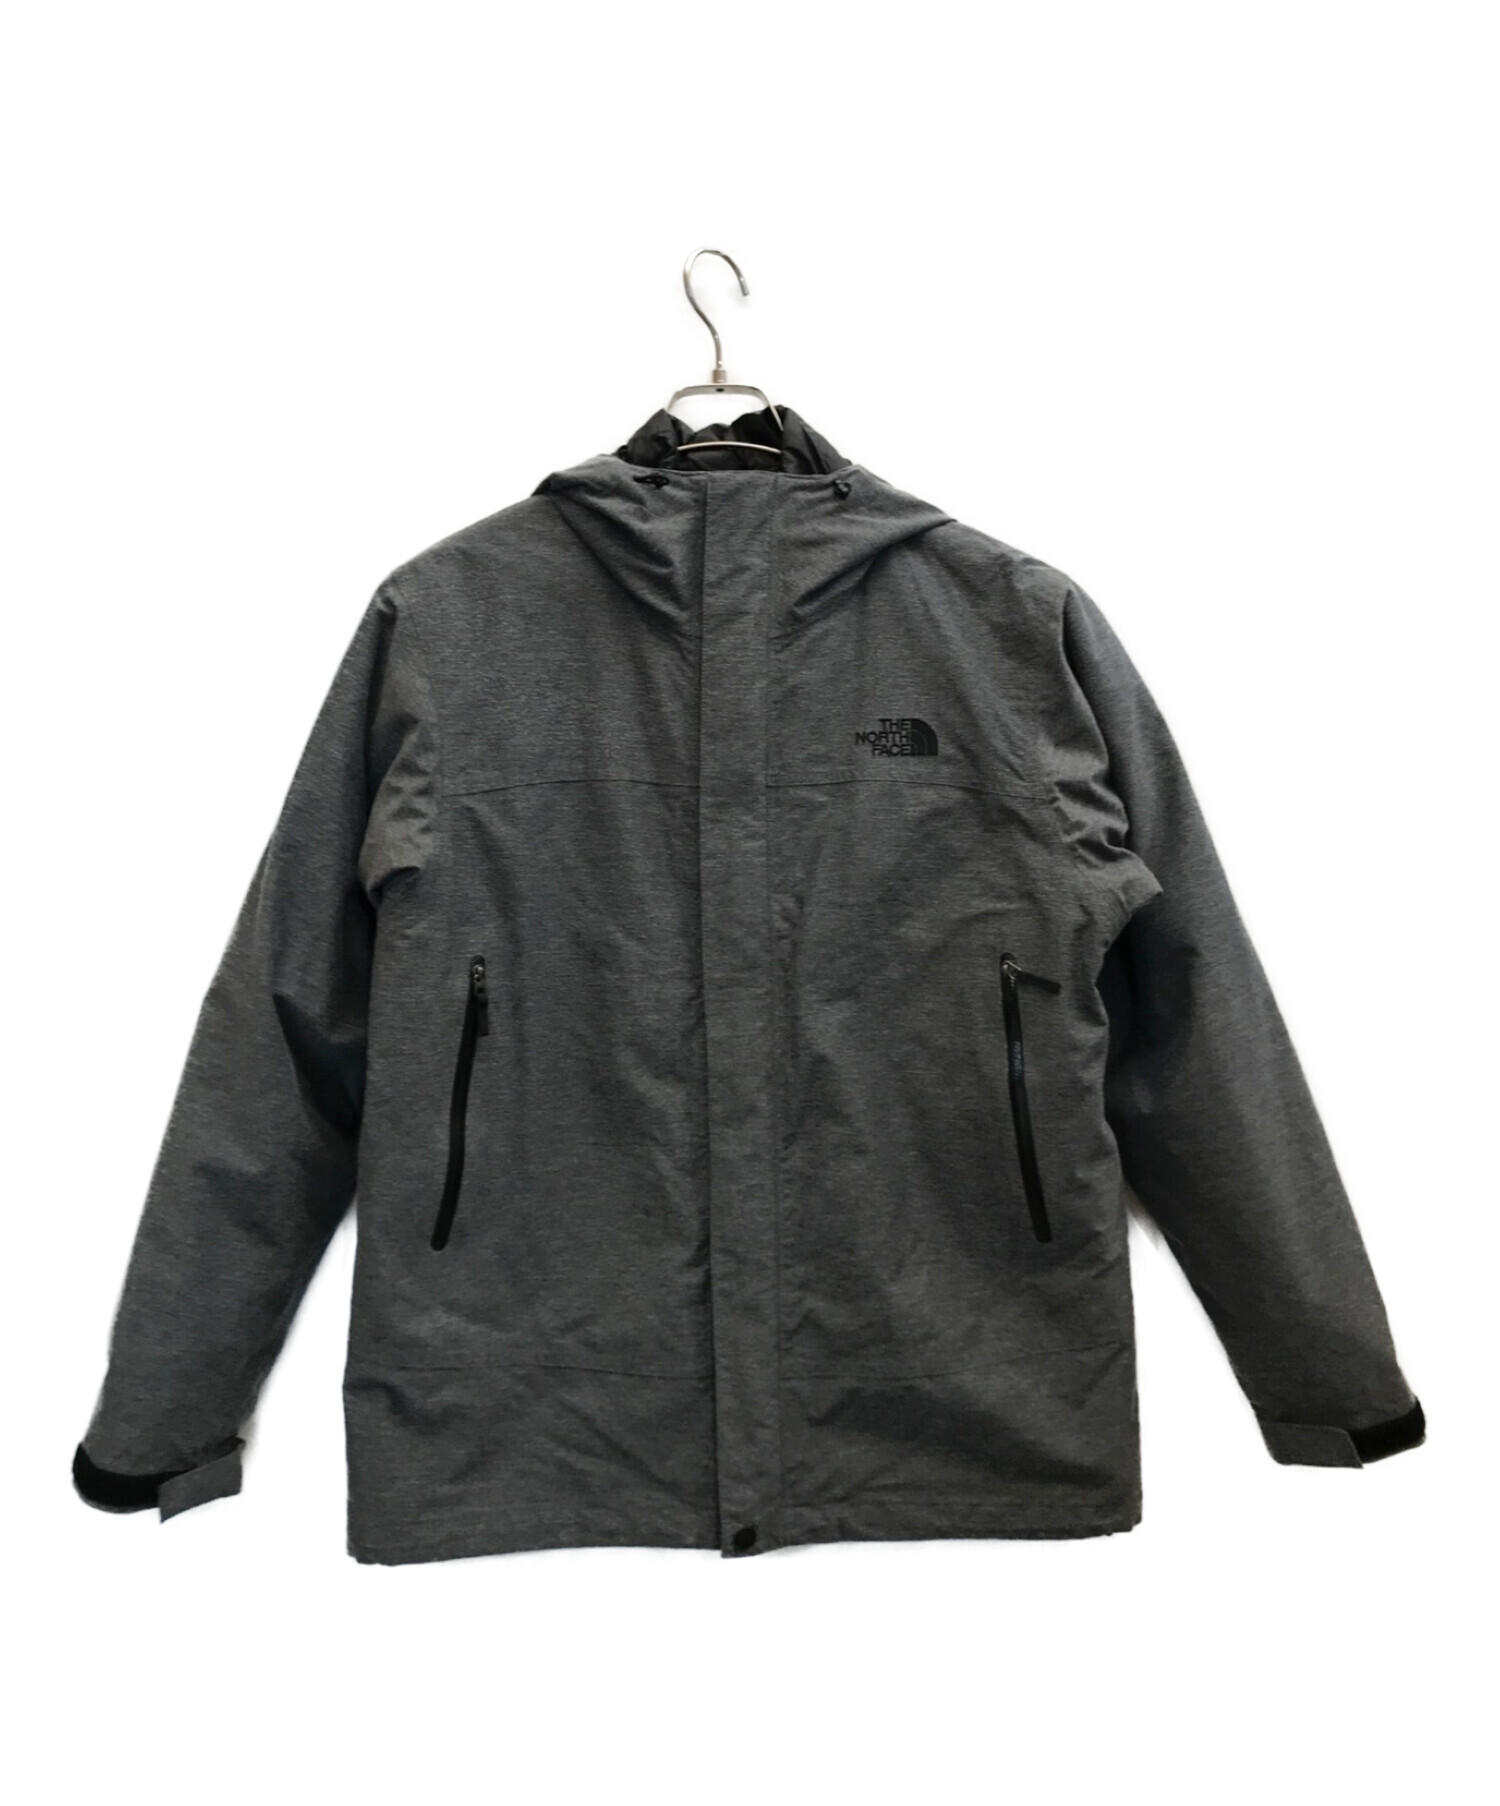 THE NORTH FACE (ザ ノース フェイス) NOVELTY CASSIUS TRICLIMATE JACKET ノベルテ  カシウストリクライメートジャケット グレー サイズ:M